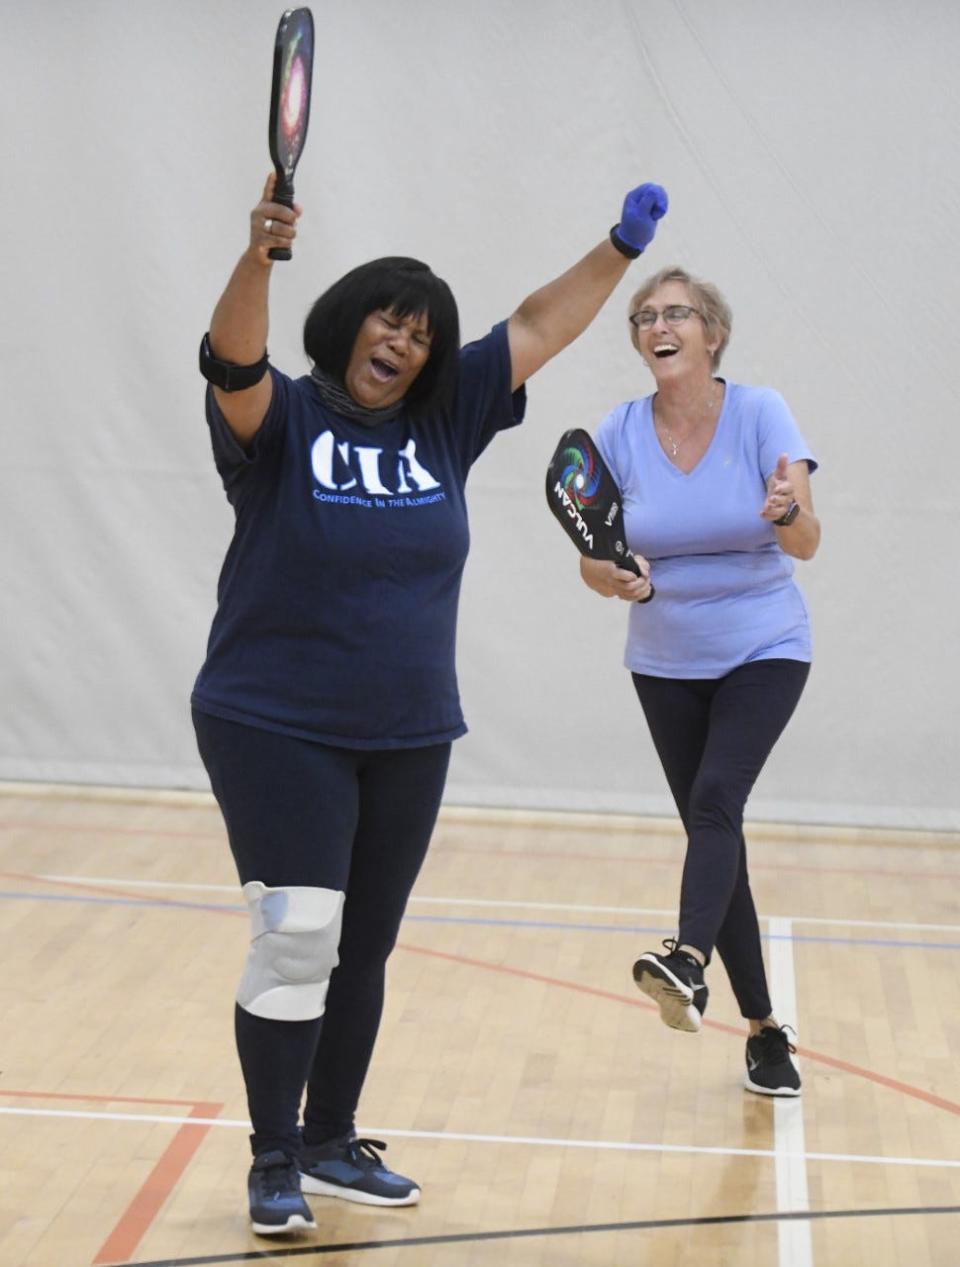 Karen Rudolph, left, and her pickleball partner, Kathy Harper, celebrate scoring a point, while playing pickleball at the Massillon Recreation Center in this file photo from 2020.